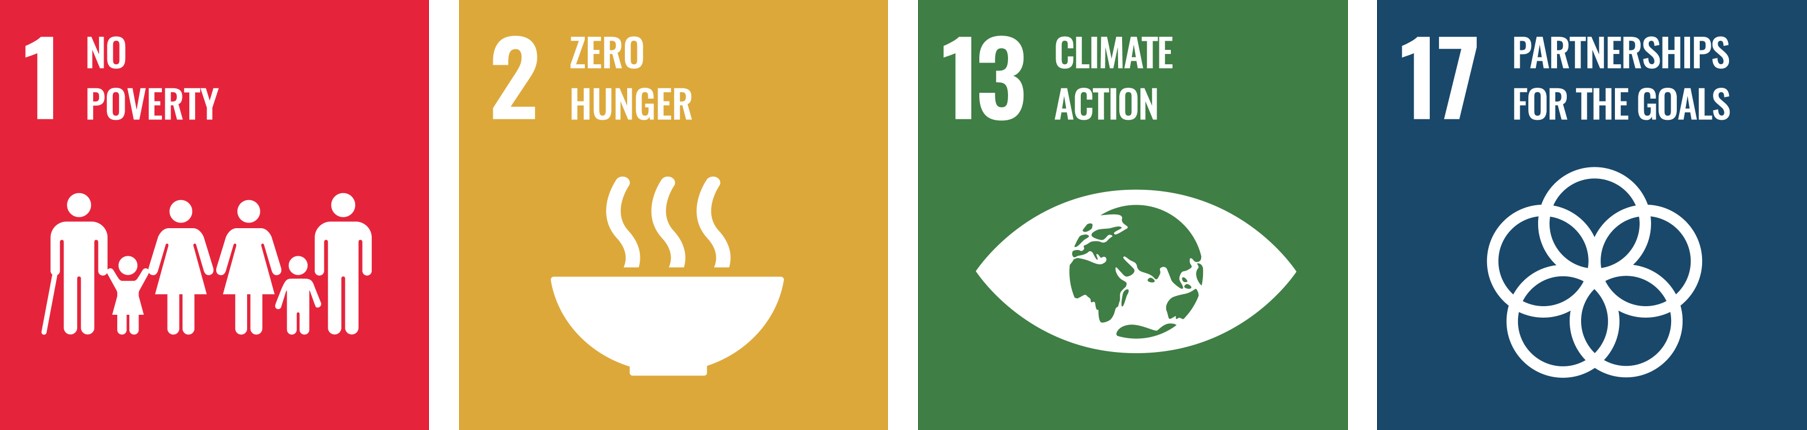 Image of the UN Sustainable Development Goal logos for goals 1,2, 13 and 17